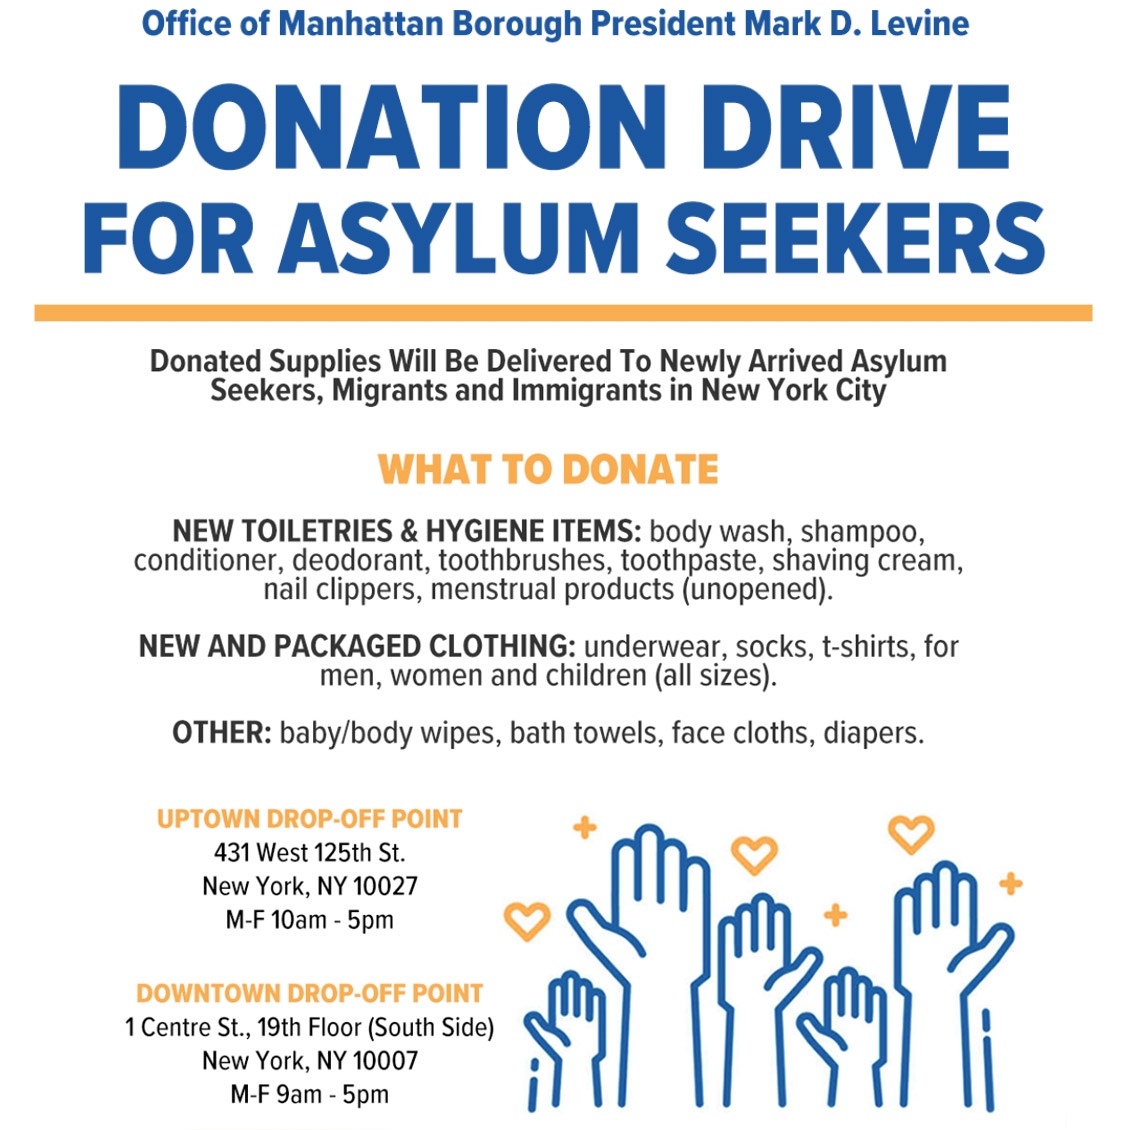 Donation-Drive-for-Asylum-Seekers